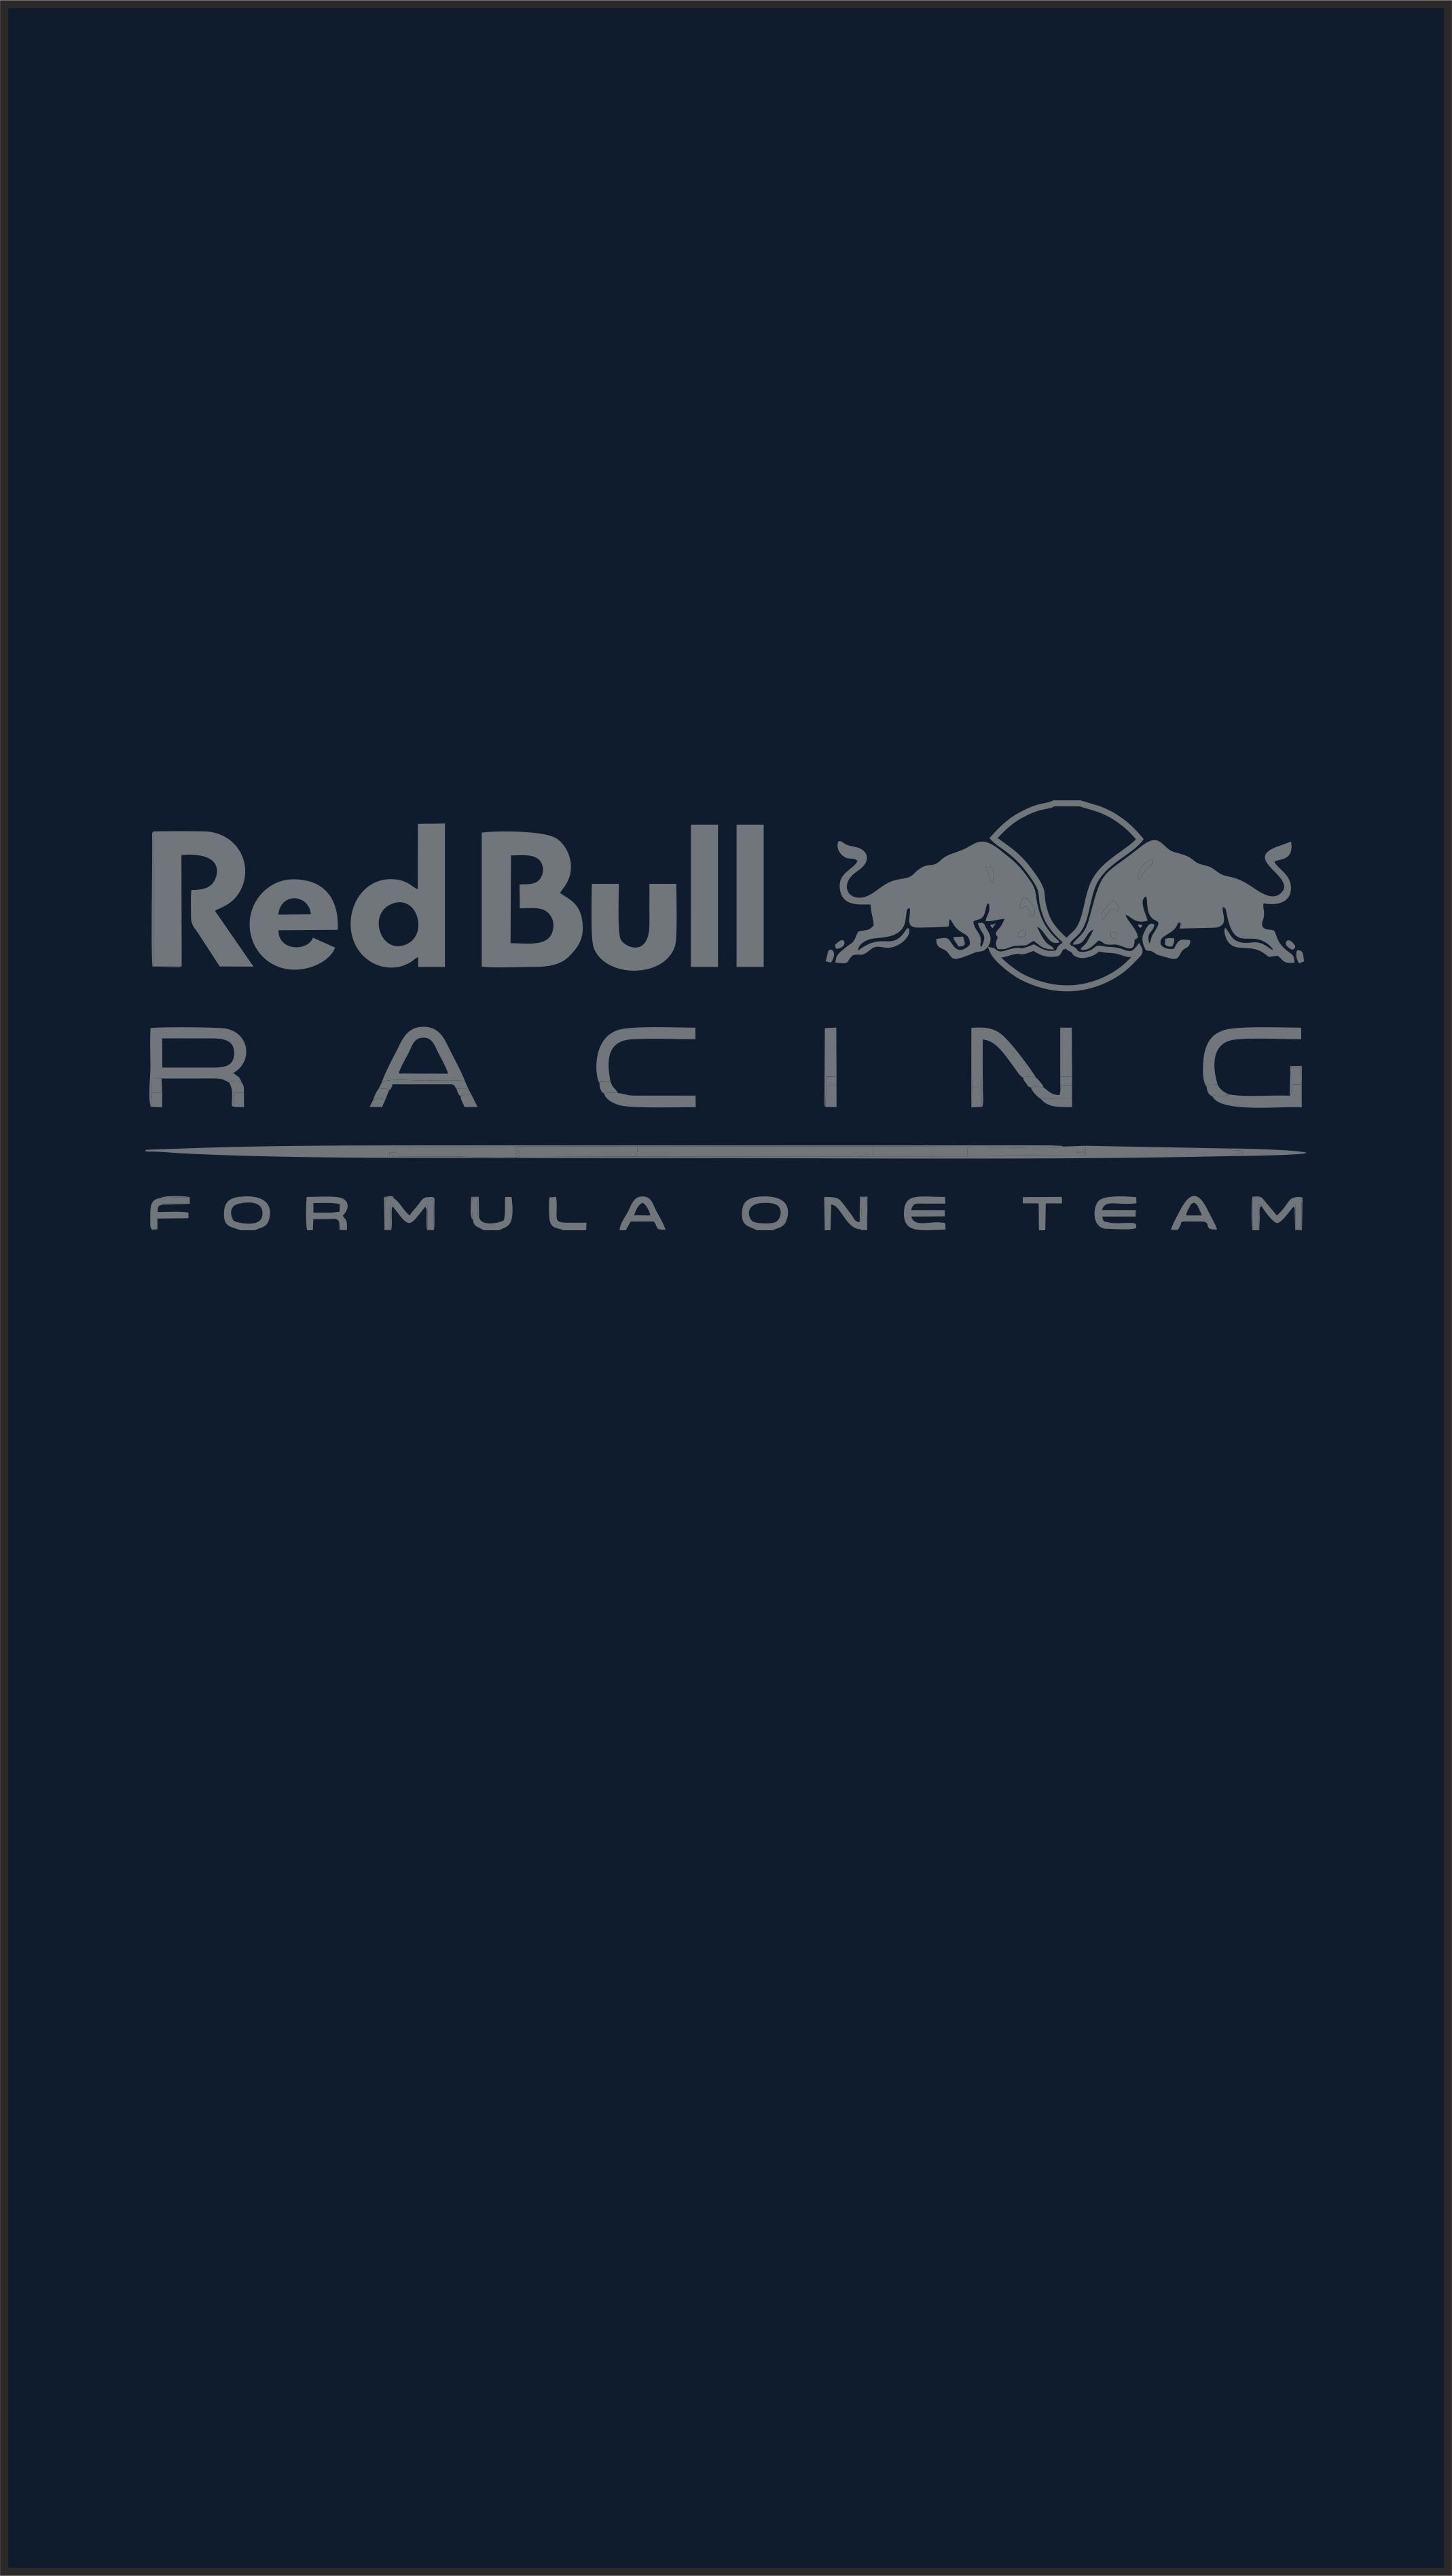 image about Red Bull Logos Monster energy ×. Fondos